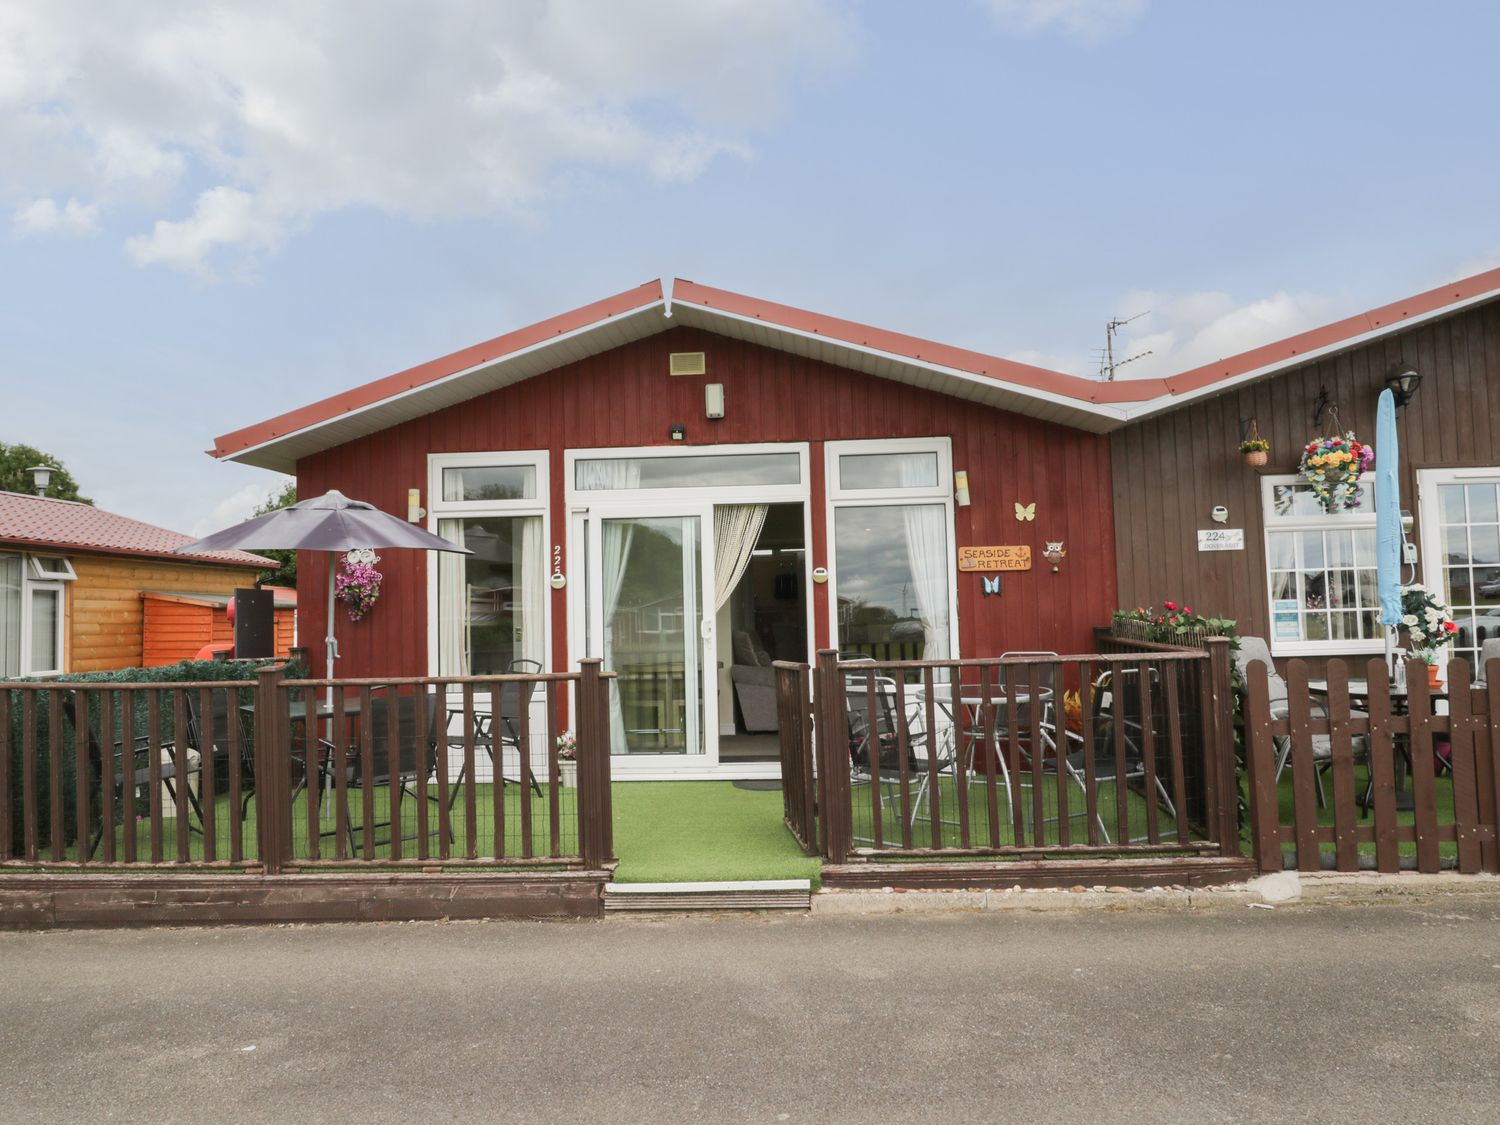 225 Seaside Retreat - North Yorkshire (incl. Whitby) - 1110671 - photo 1